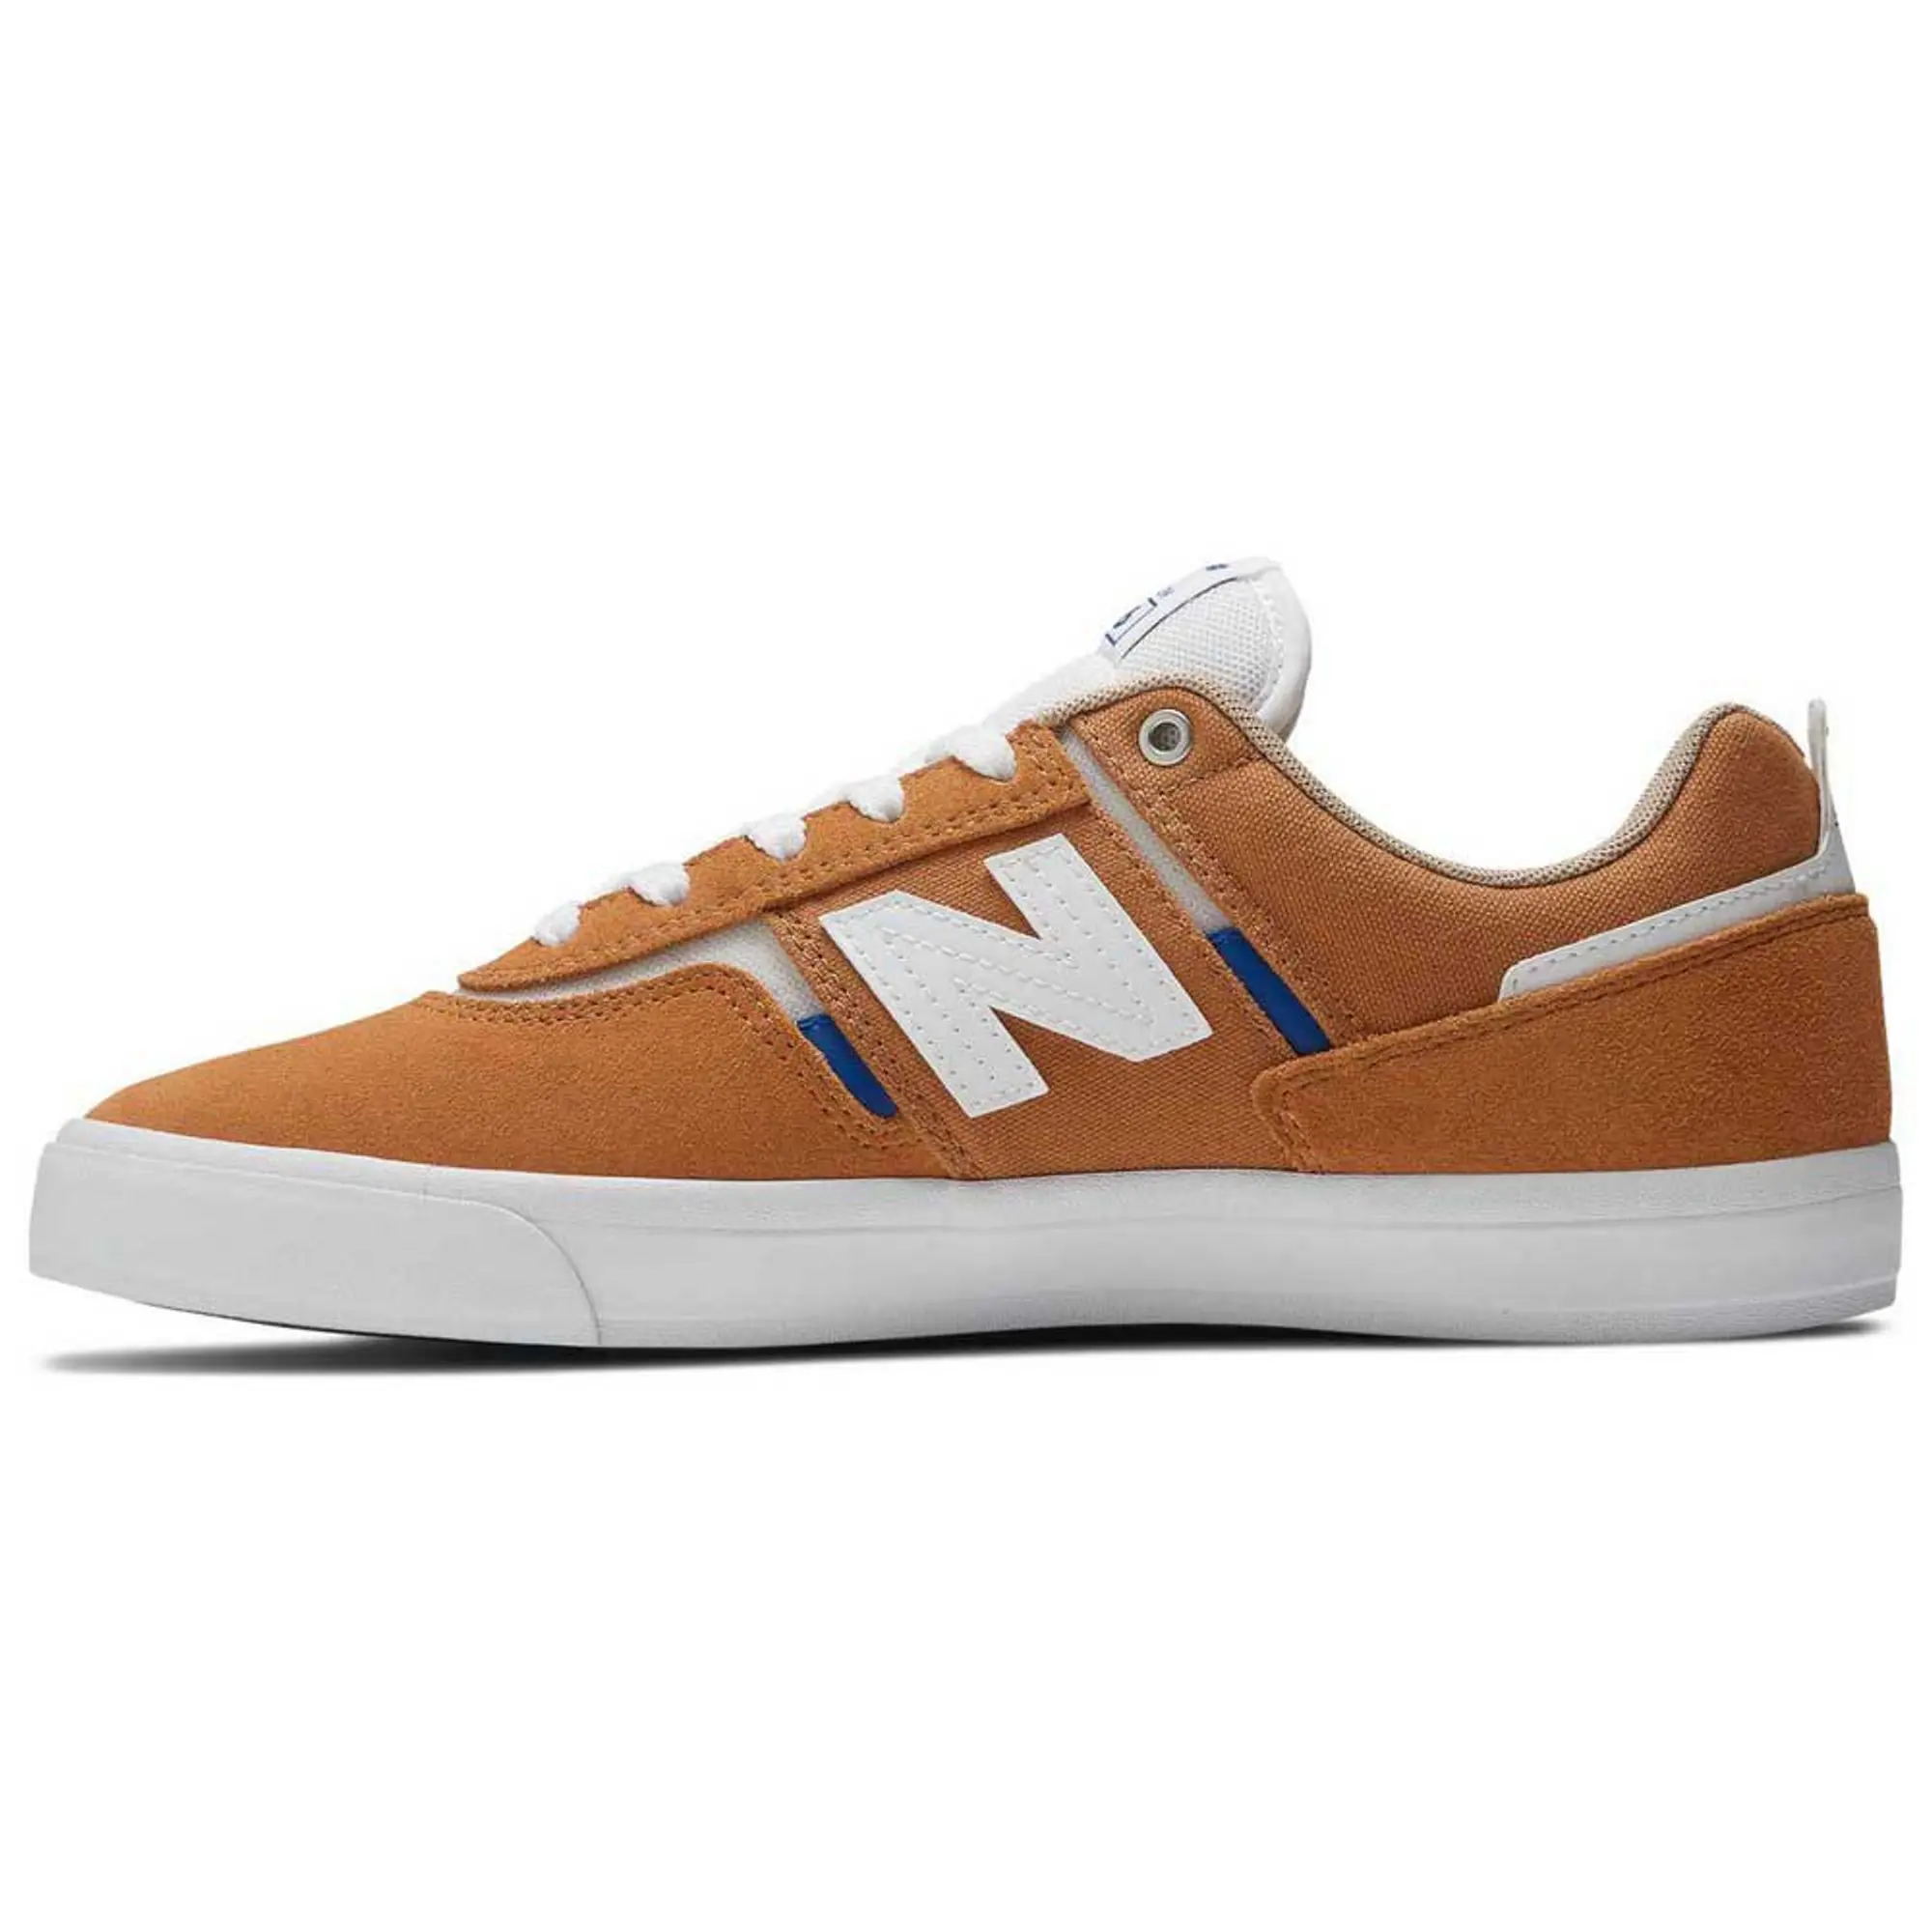 New Balance Men's NB Numeric Jamie Foy 306 in Brown/White Suede/Mesh